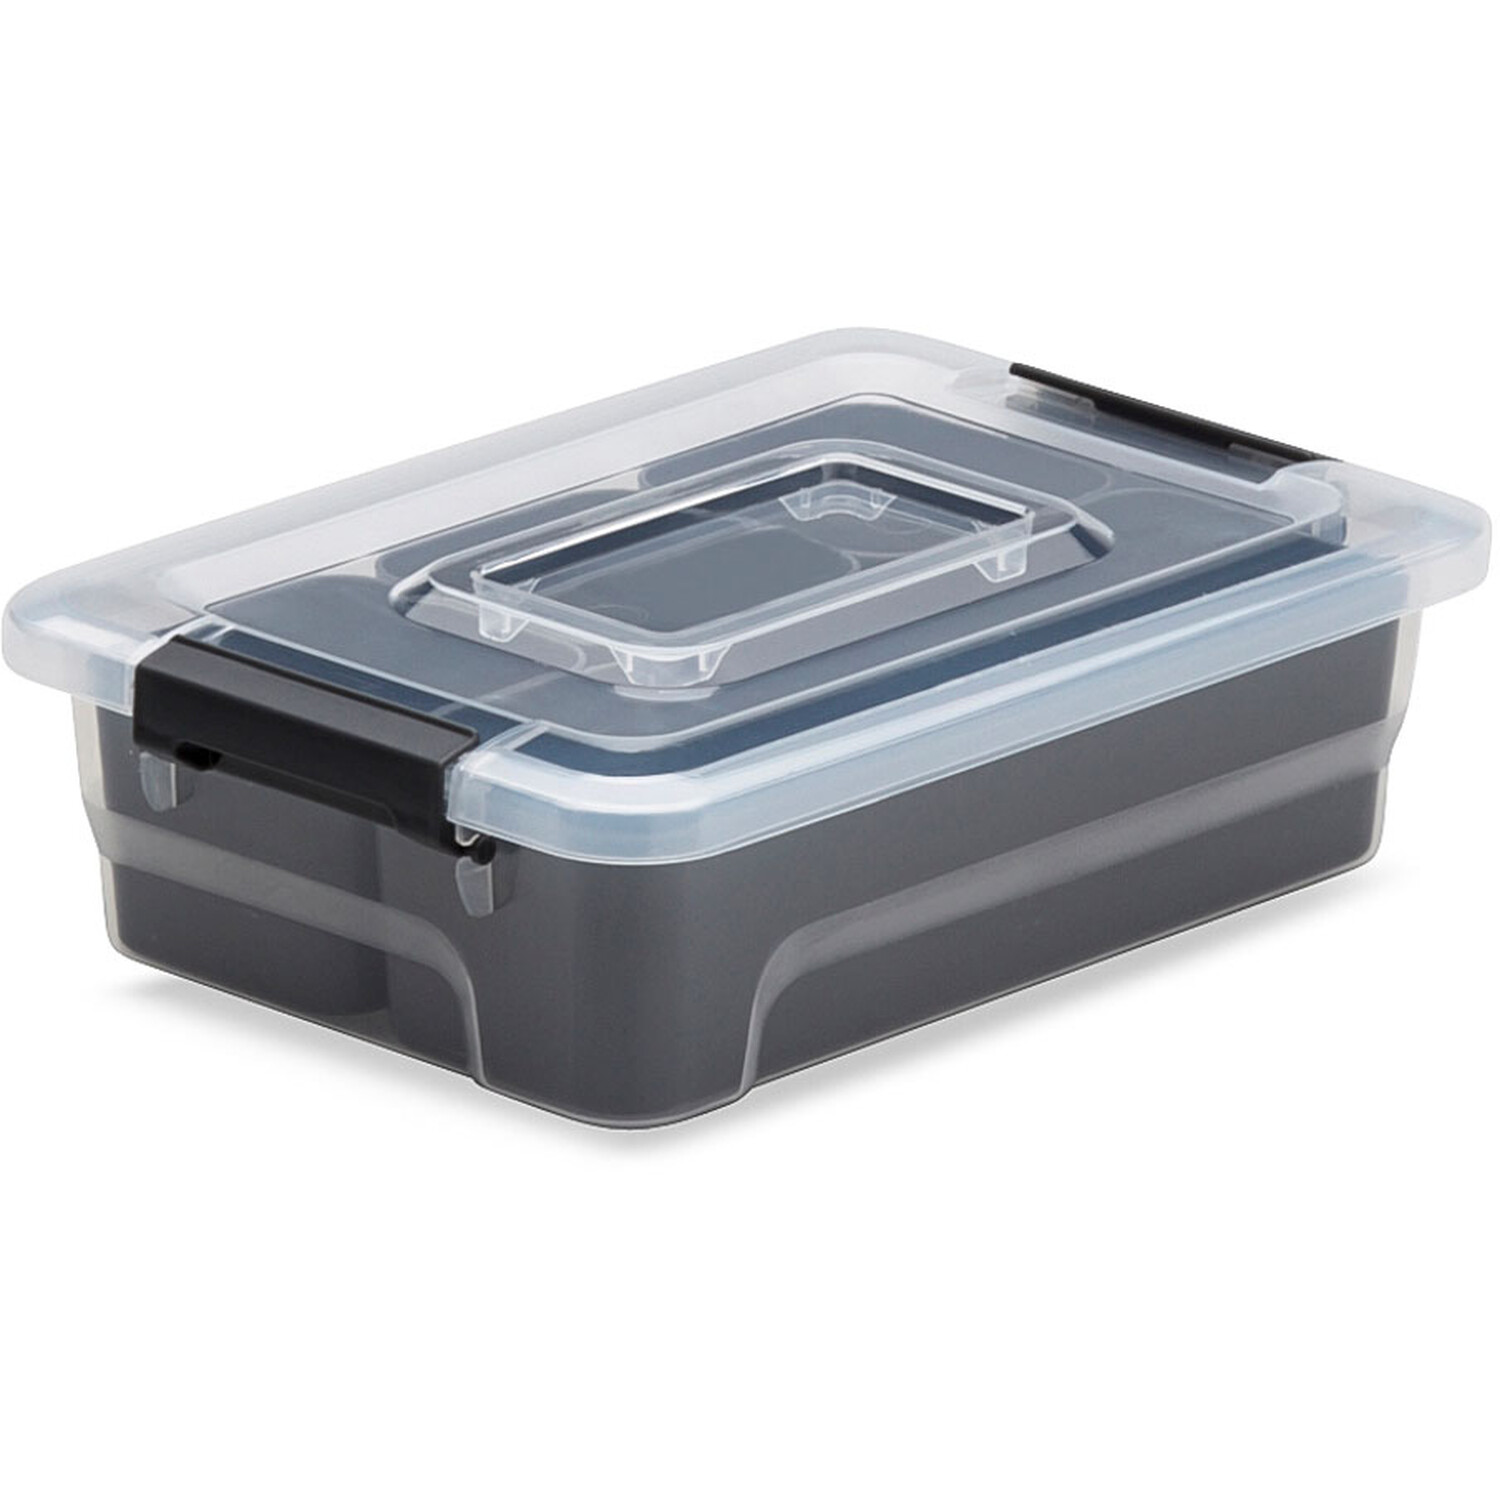 1.5 Litre Storage Container With Four Cup Insert Tray Image